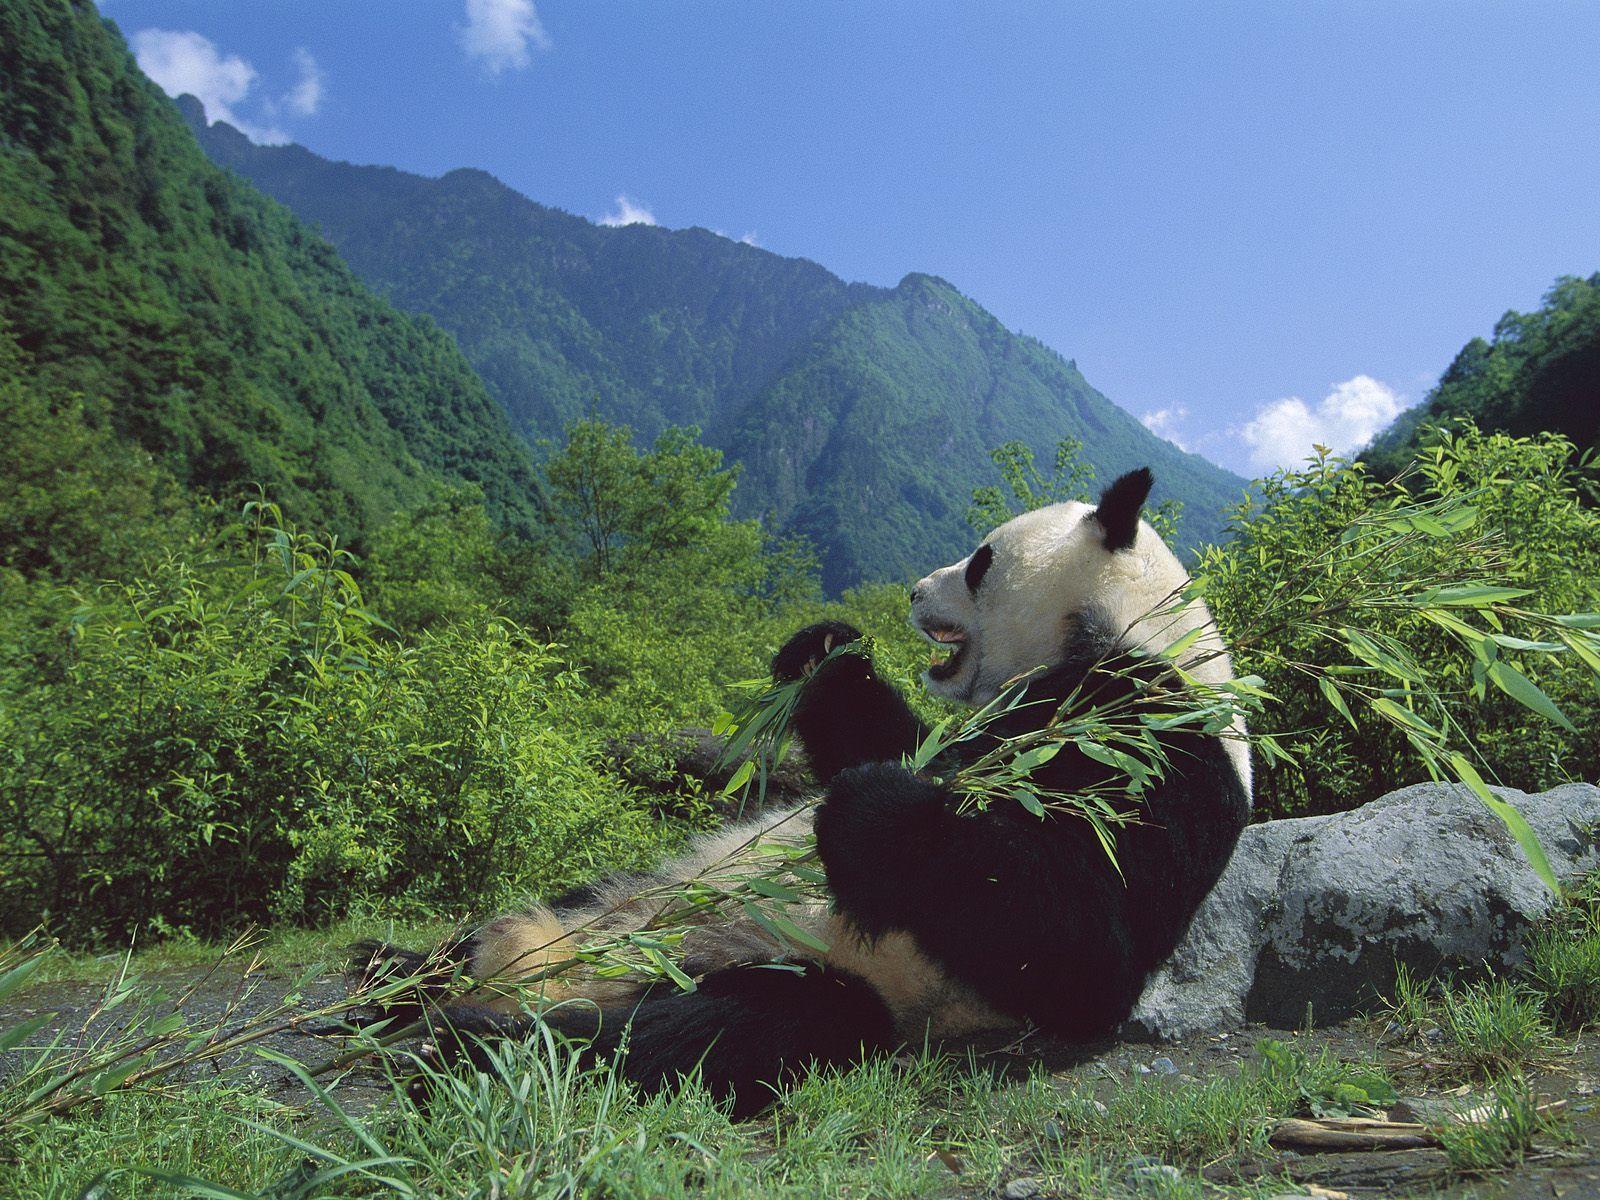 Giant Panda And Bamboo: More Than A Meal To The Endangered Bear